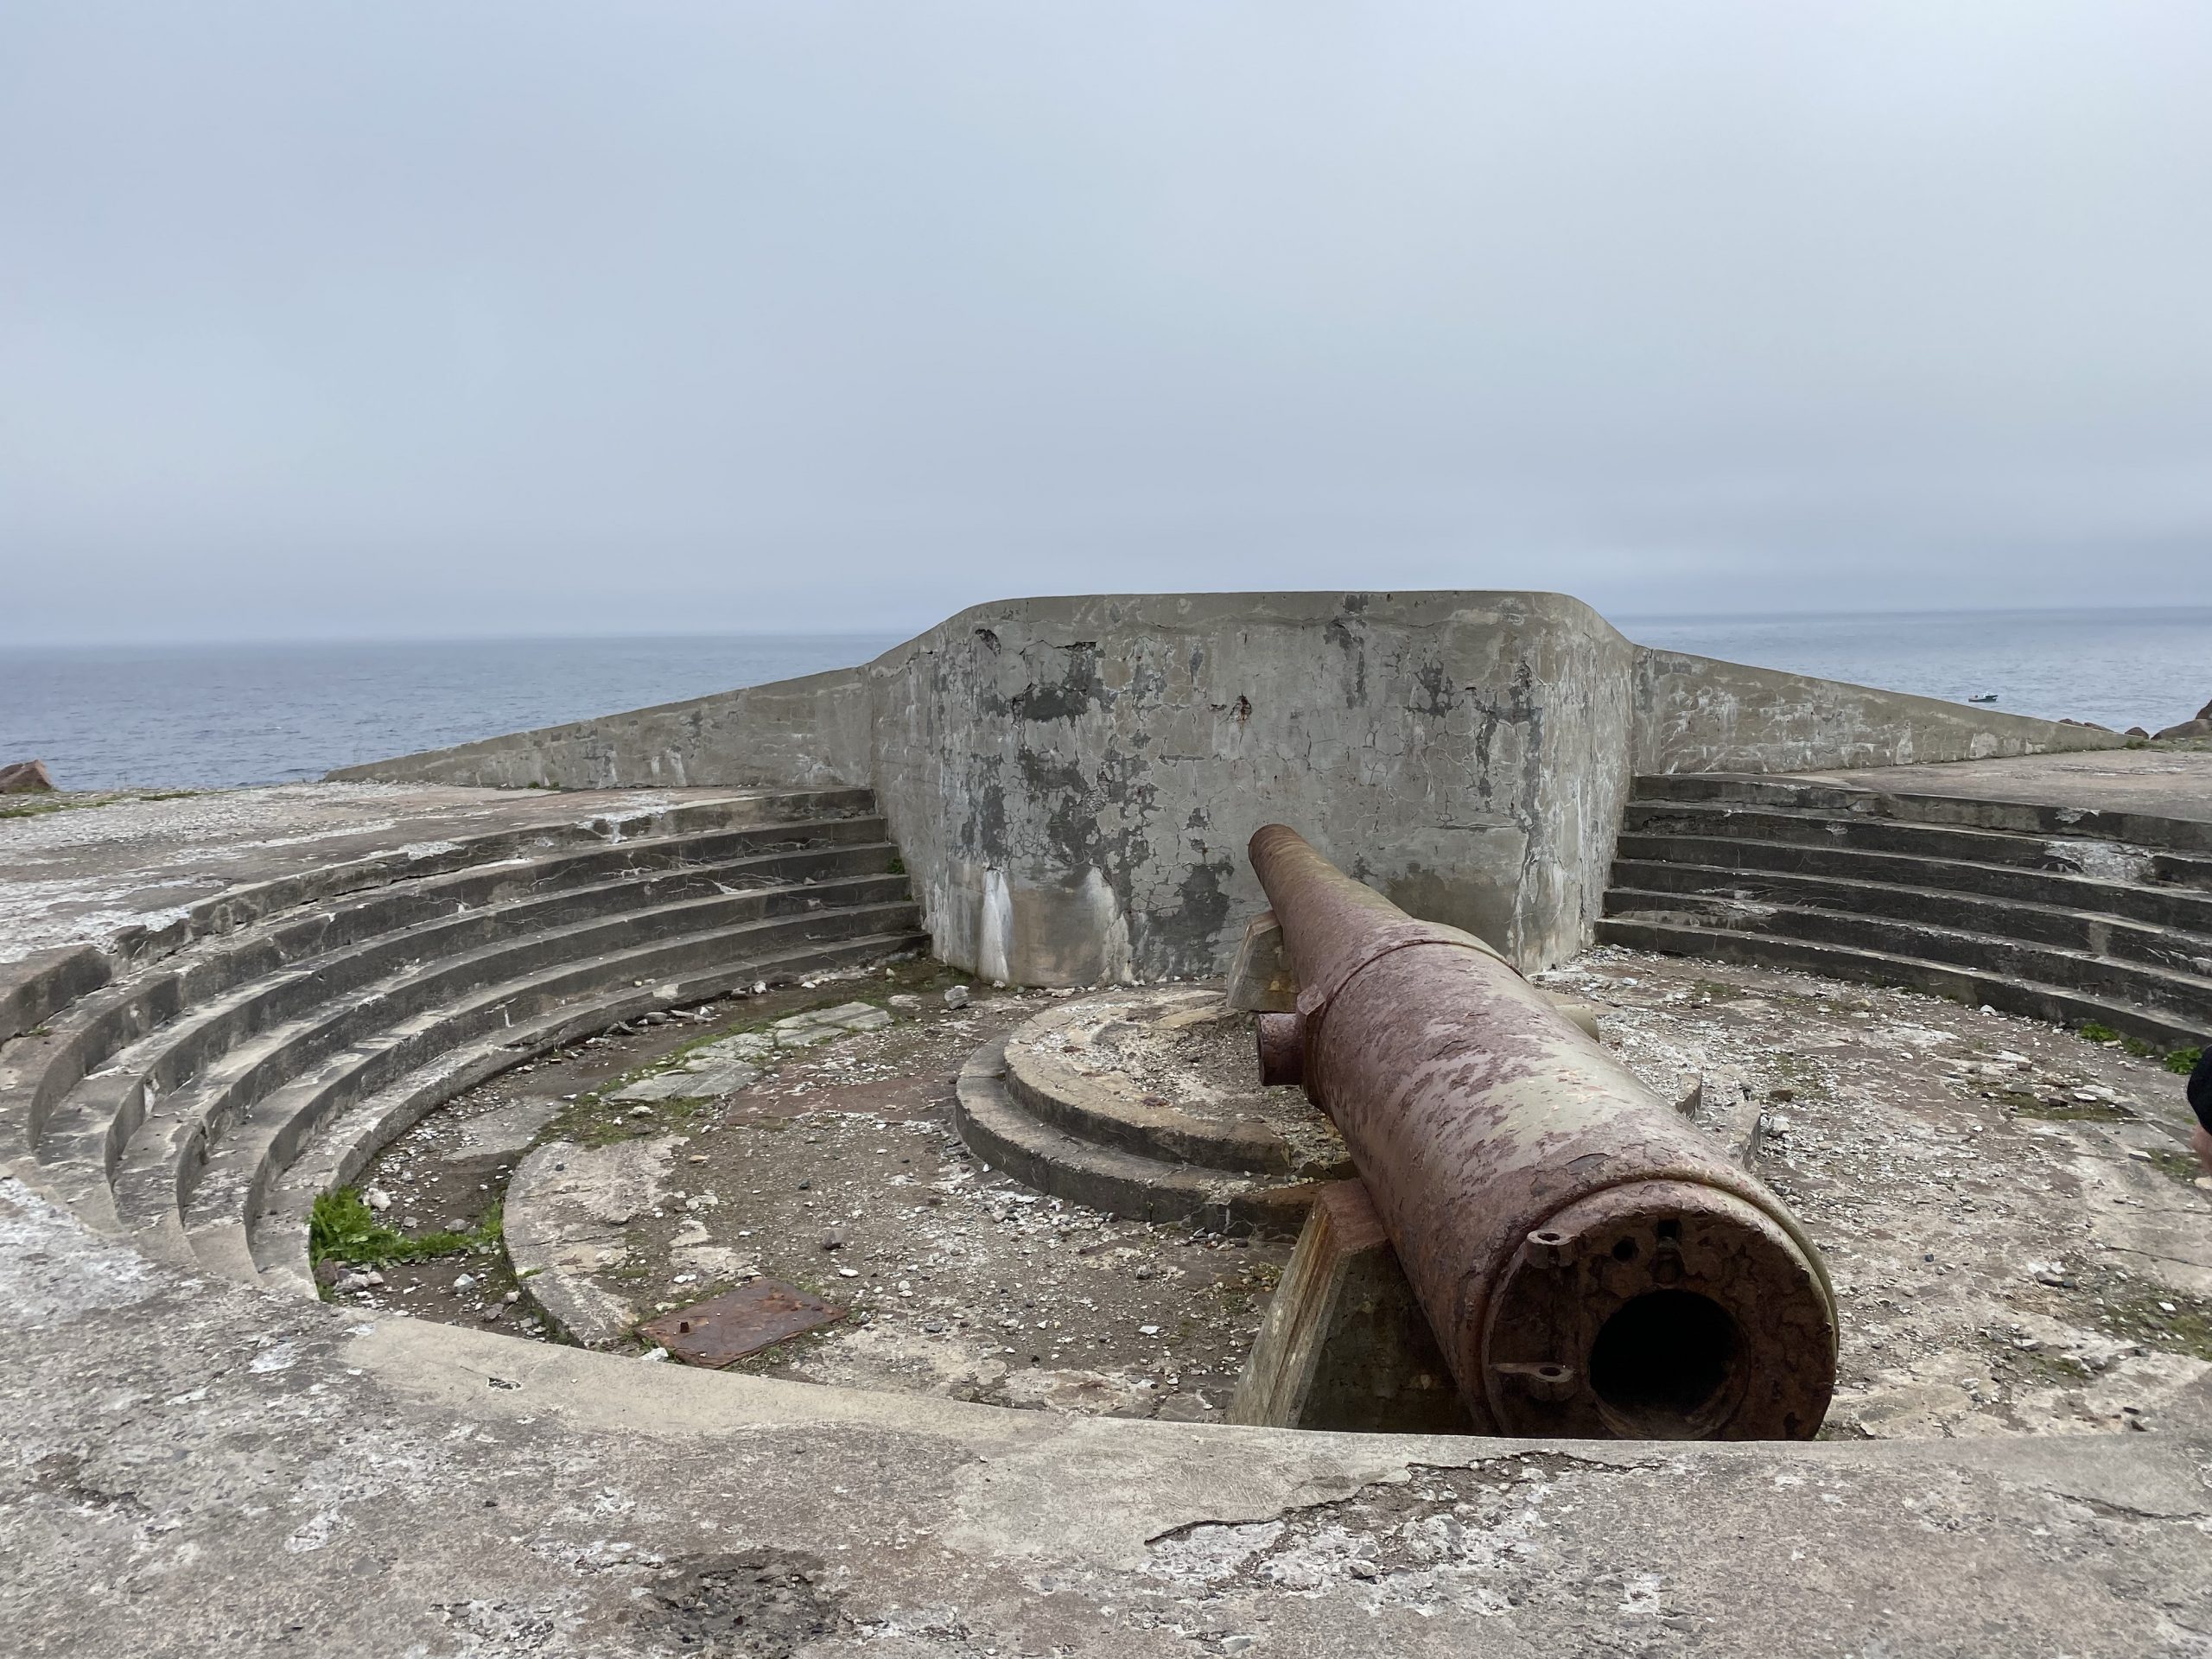 One of the big guns stationed at Cape Spear in World War II. The rest of the gun was dismantled, but the barrel was too heavy to move.